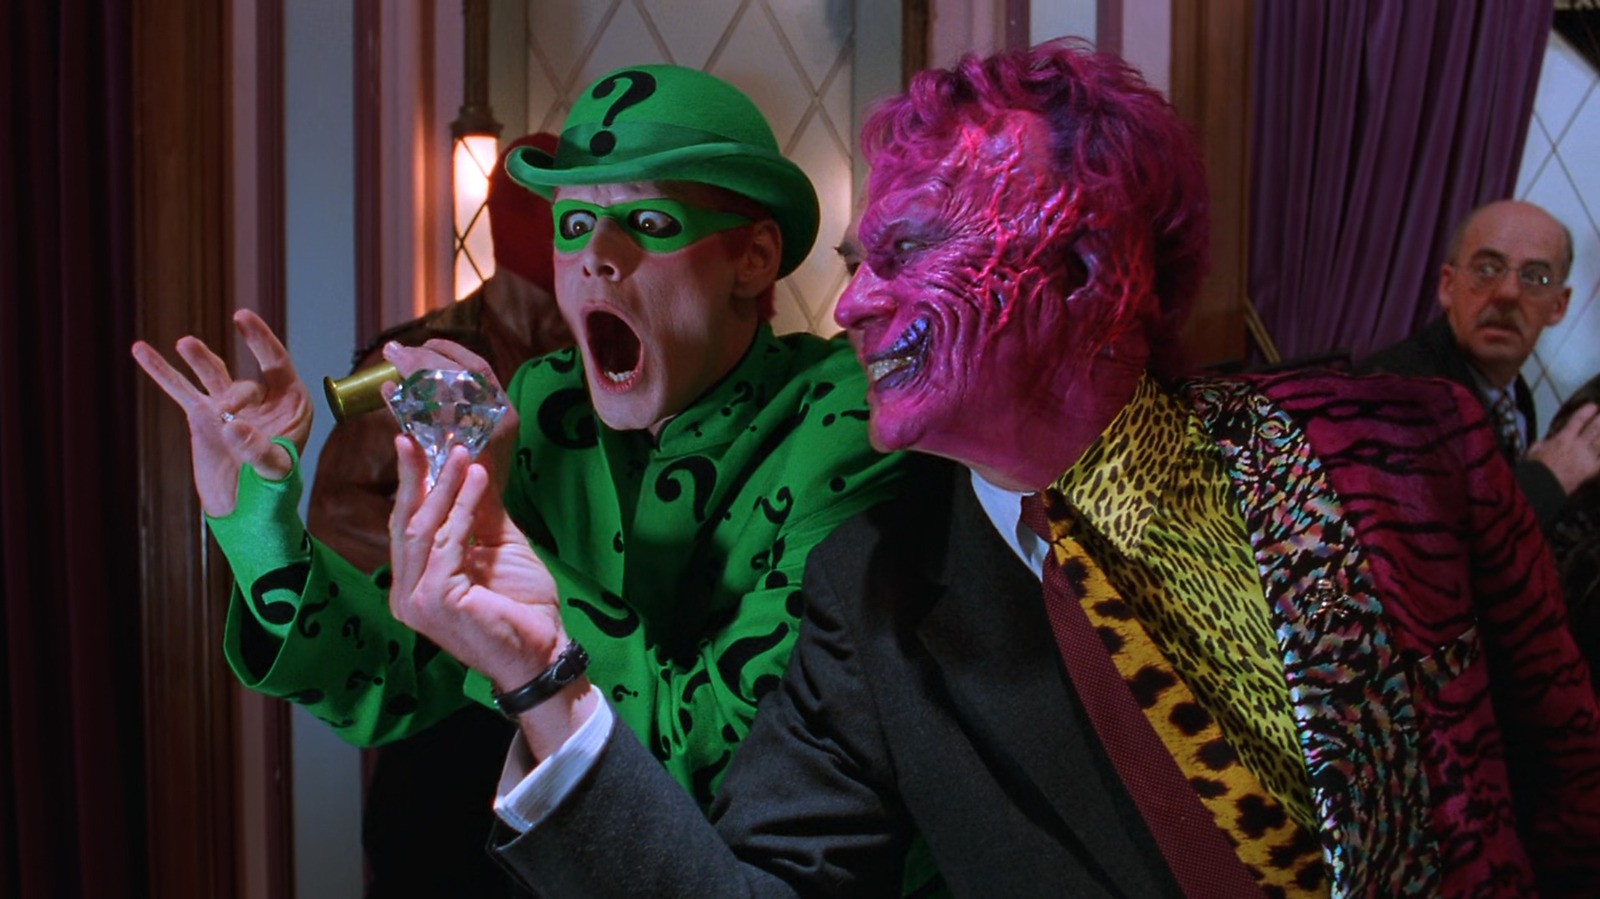 Jim Carrey as The Riddler visiting Two-face in Batman Forever